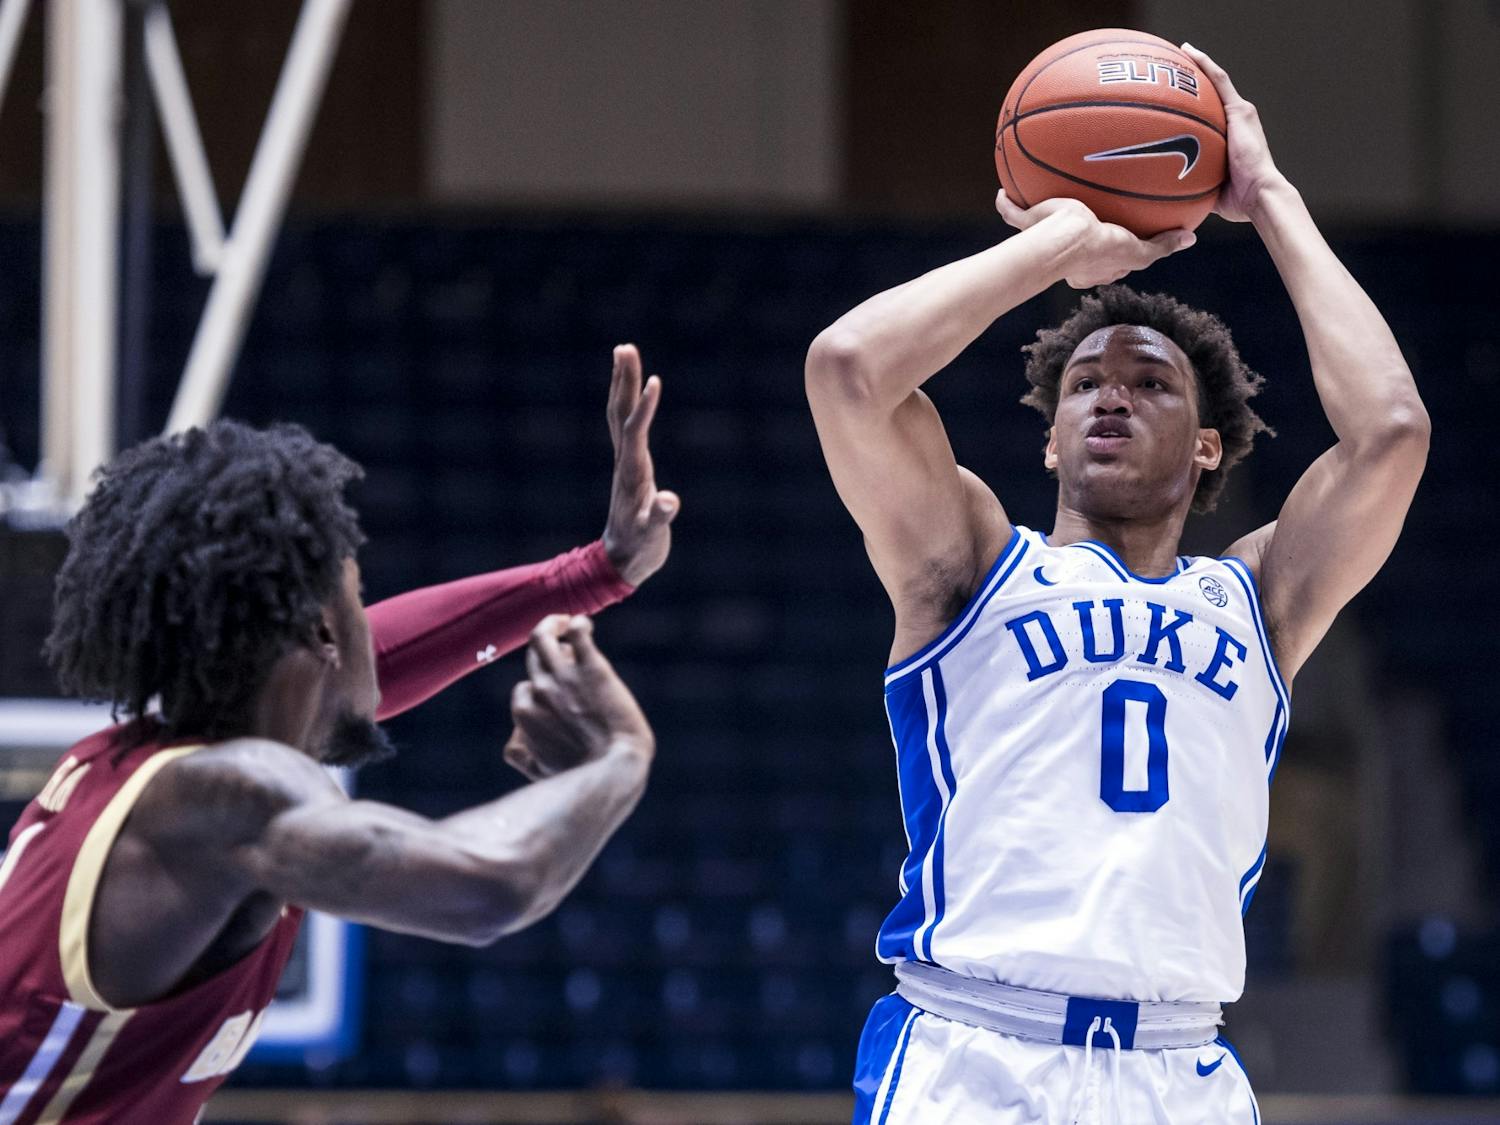 Wendell Moore Jr. looks to carry over his hot shooting into the next game to help the Blue Devils add to their win streak.